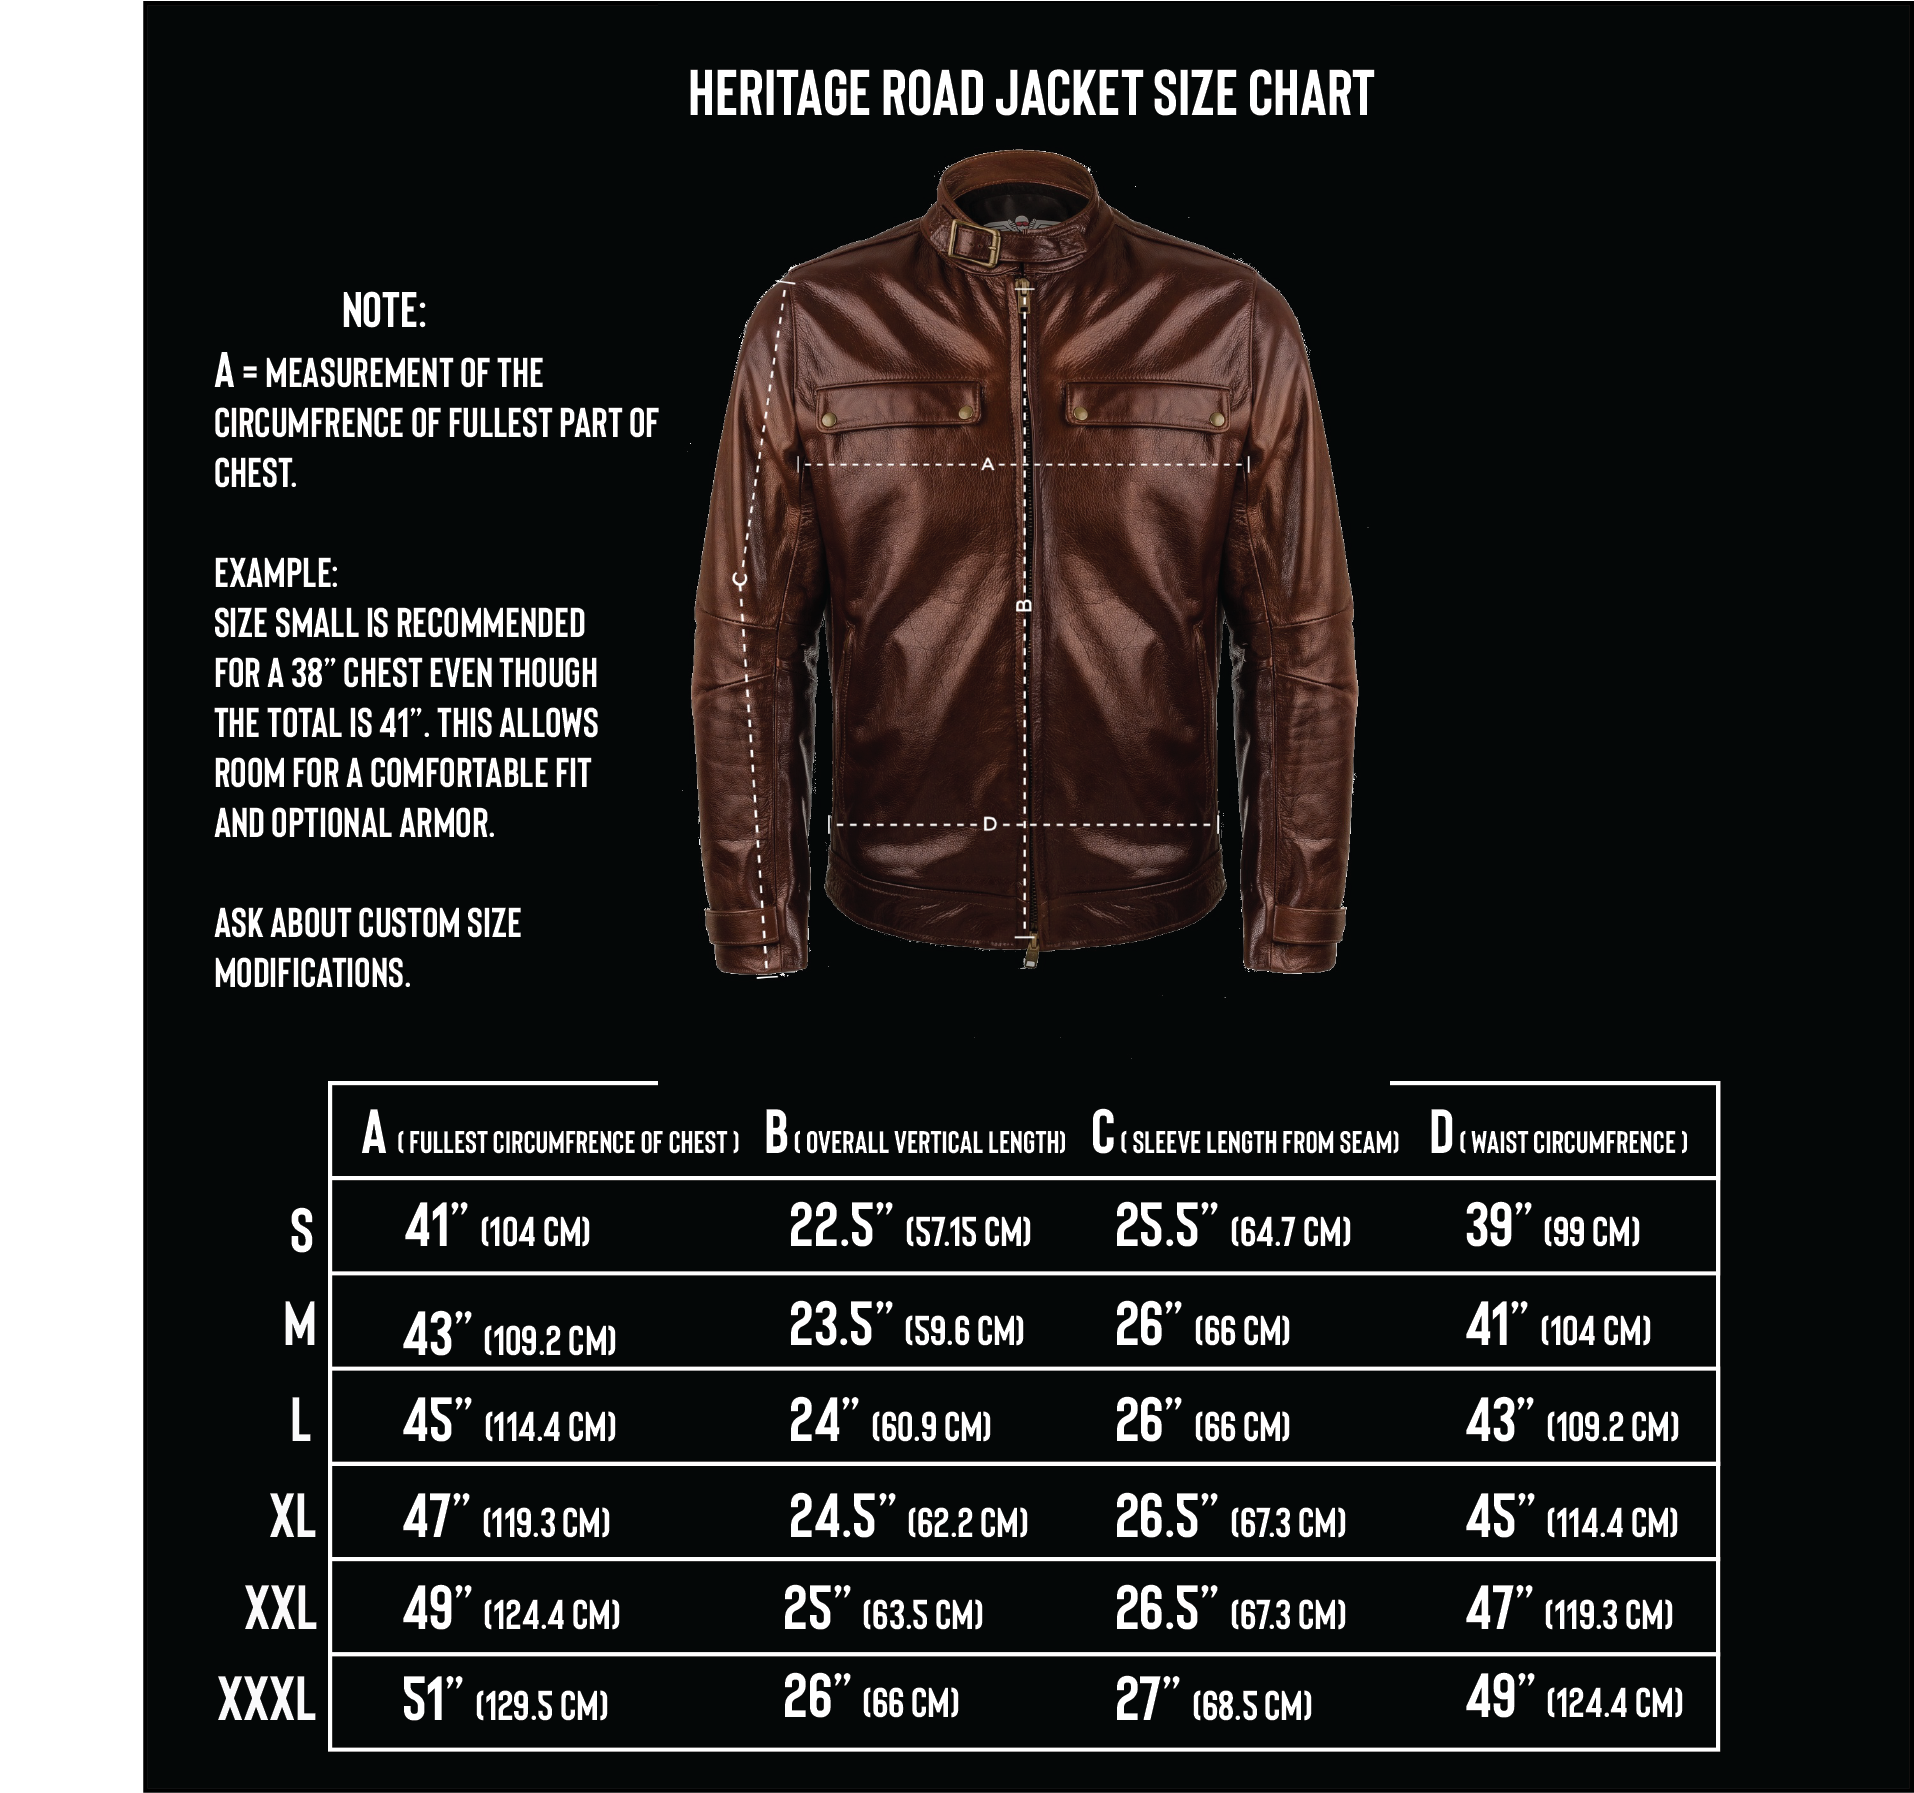 open road leather jacket